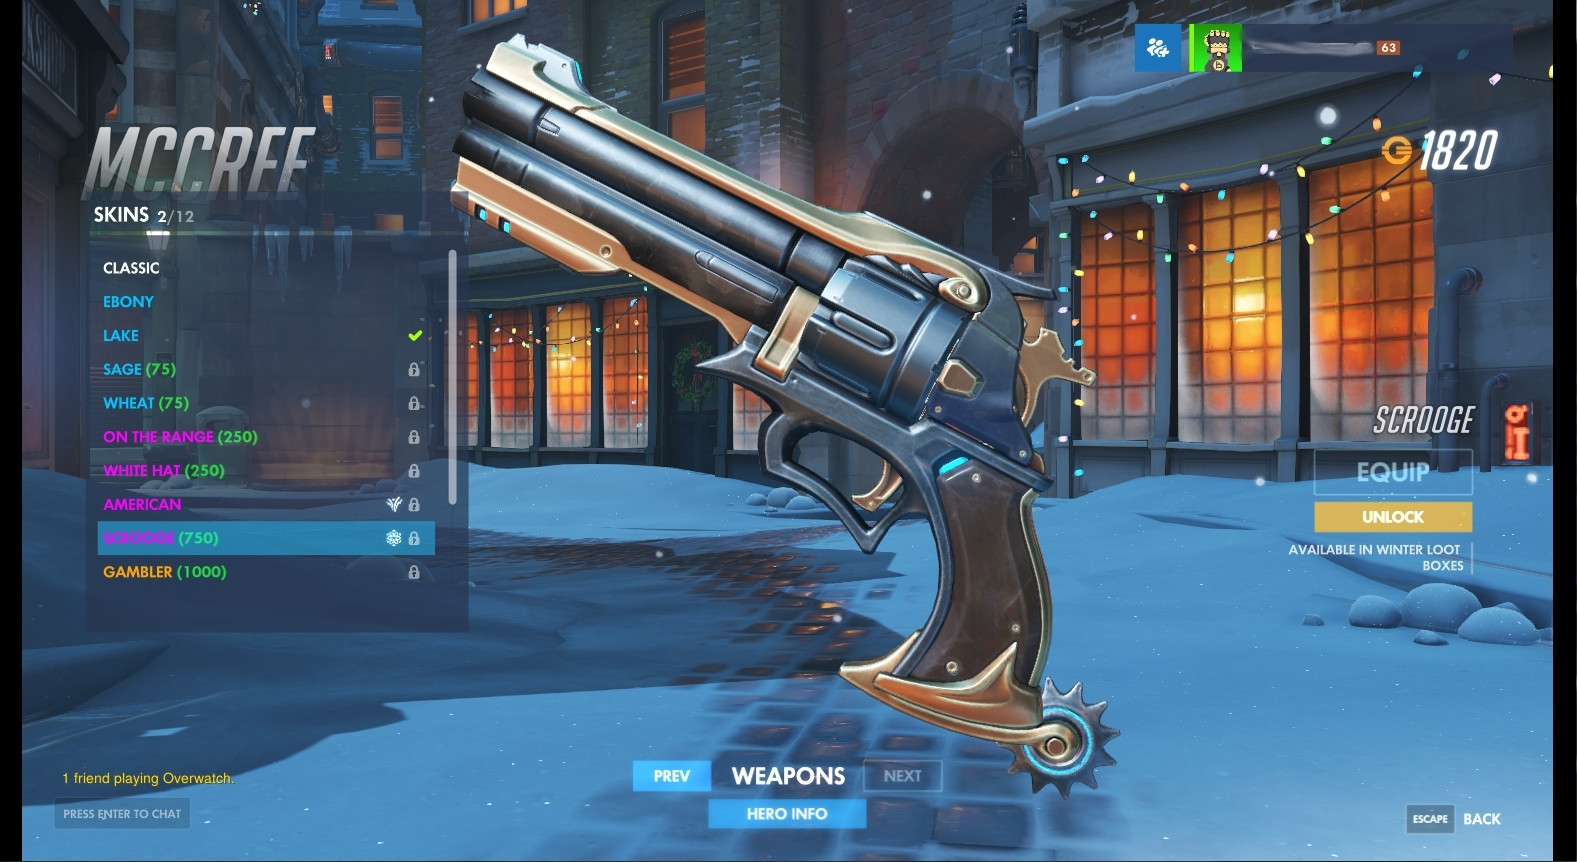 McCree (Scrooge) Weapon